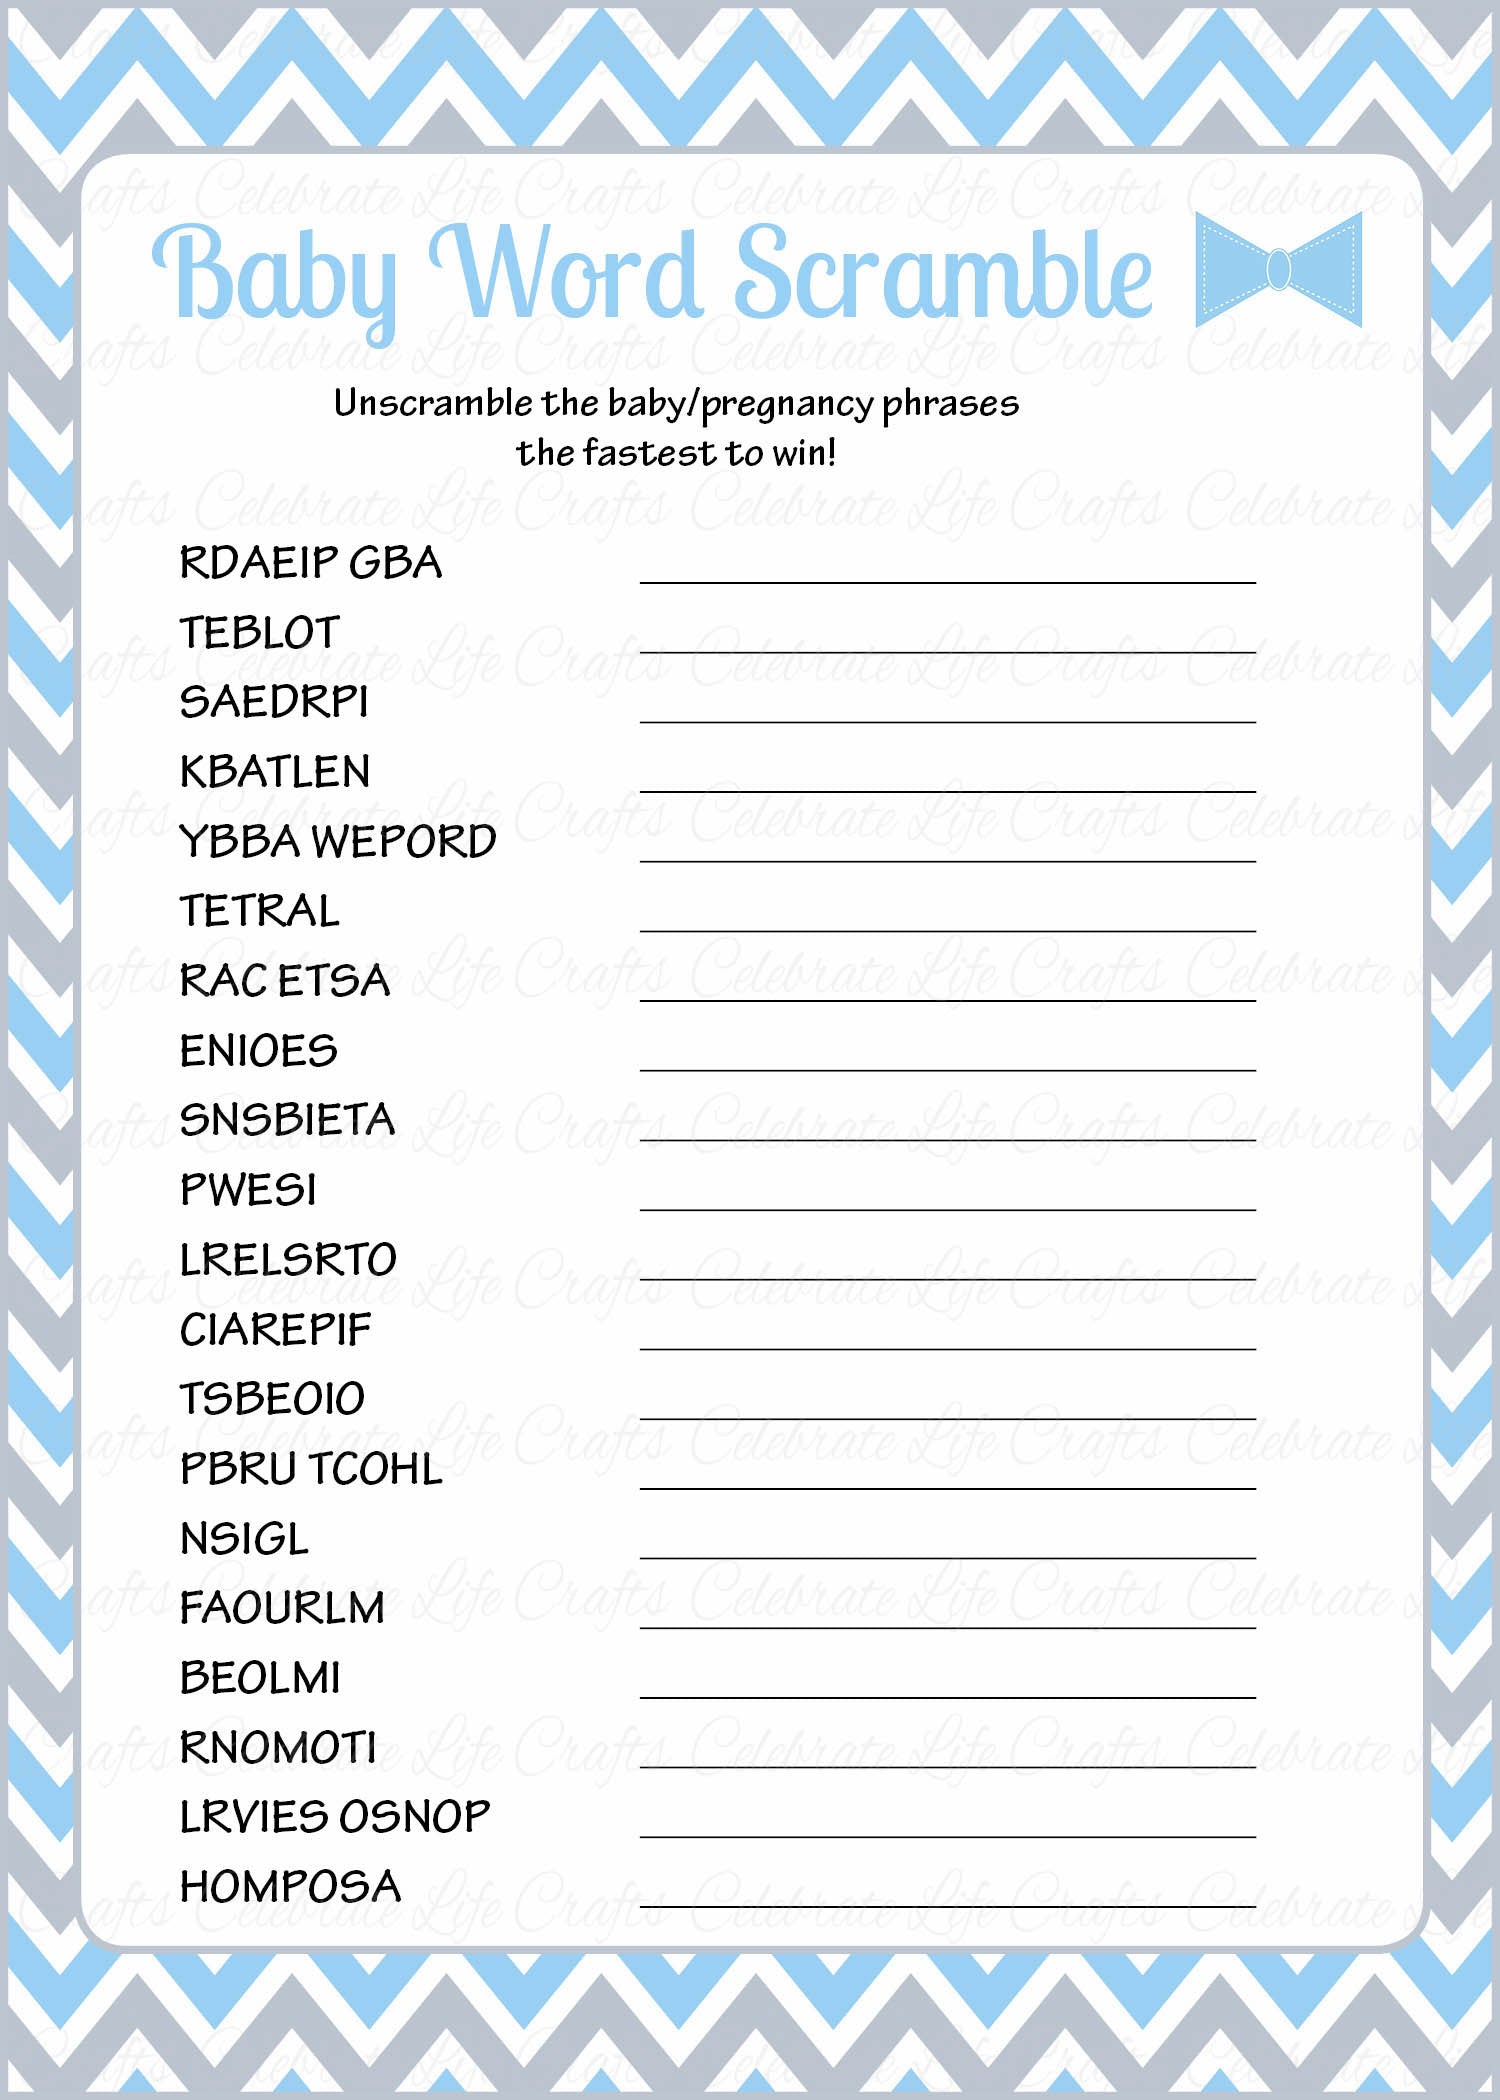 word-scramble-baby-shower-game-little-man-baby-shower-theme-for-baby